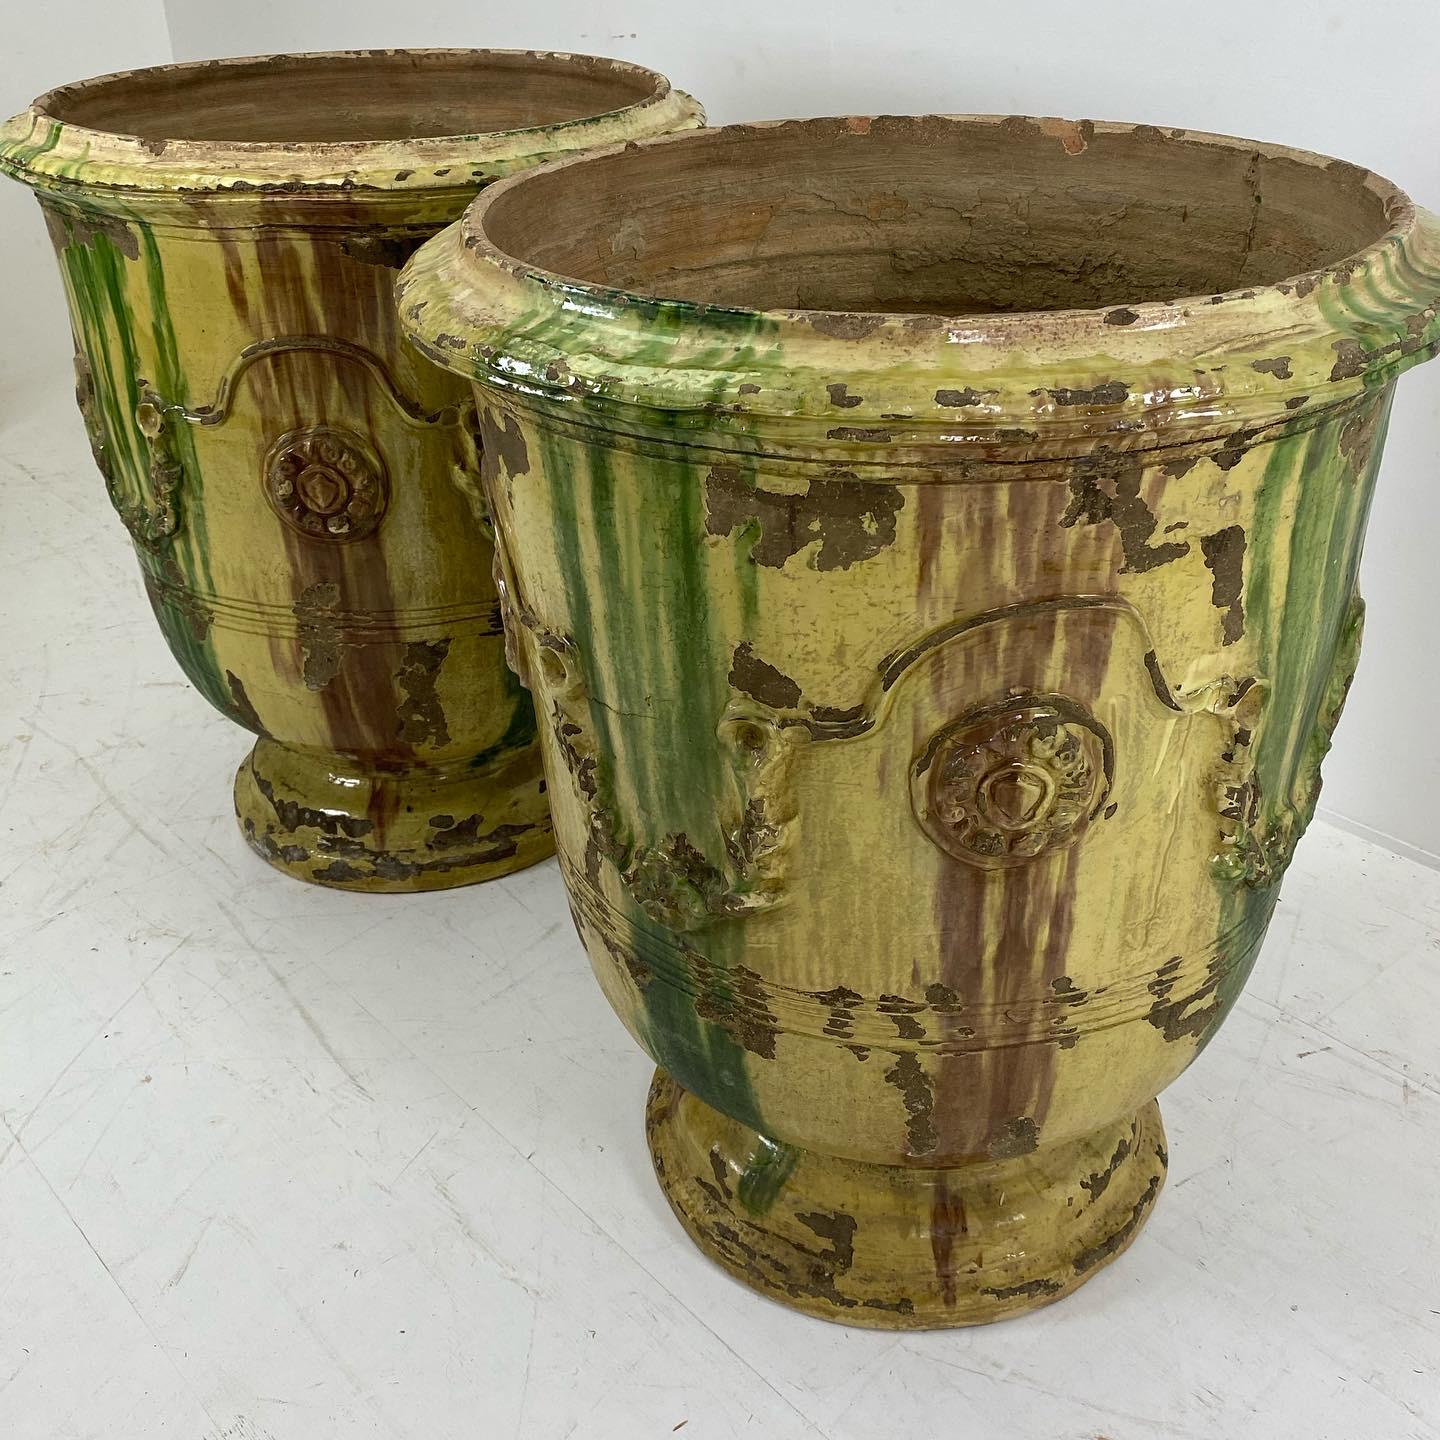 Beautiful pair of Anduze terracotta planters, hand glazed adorned with garlands and medaillons
variation in tone color from green to yellow
great patina.